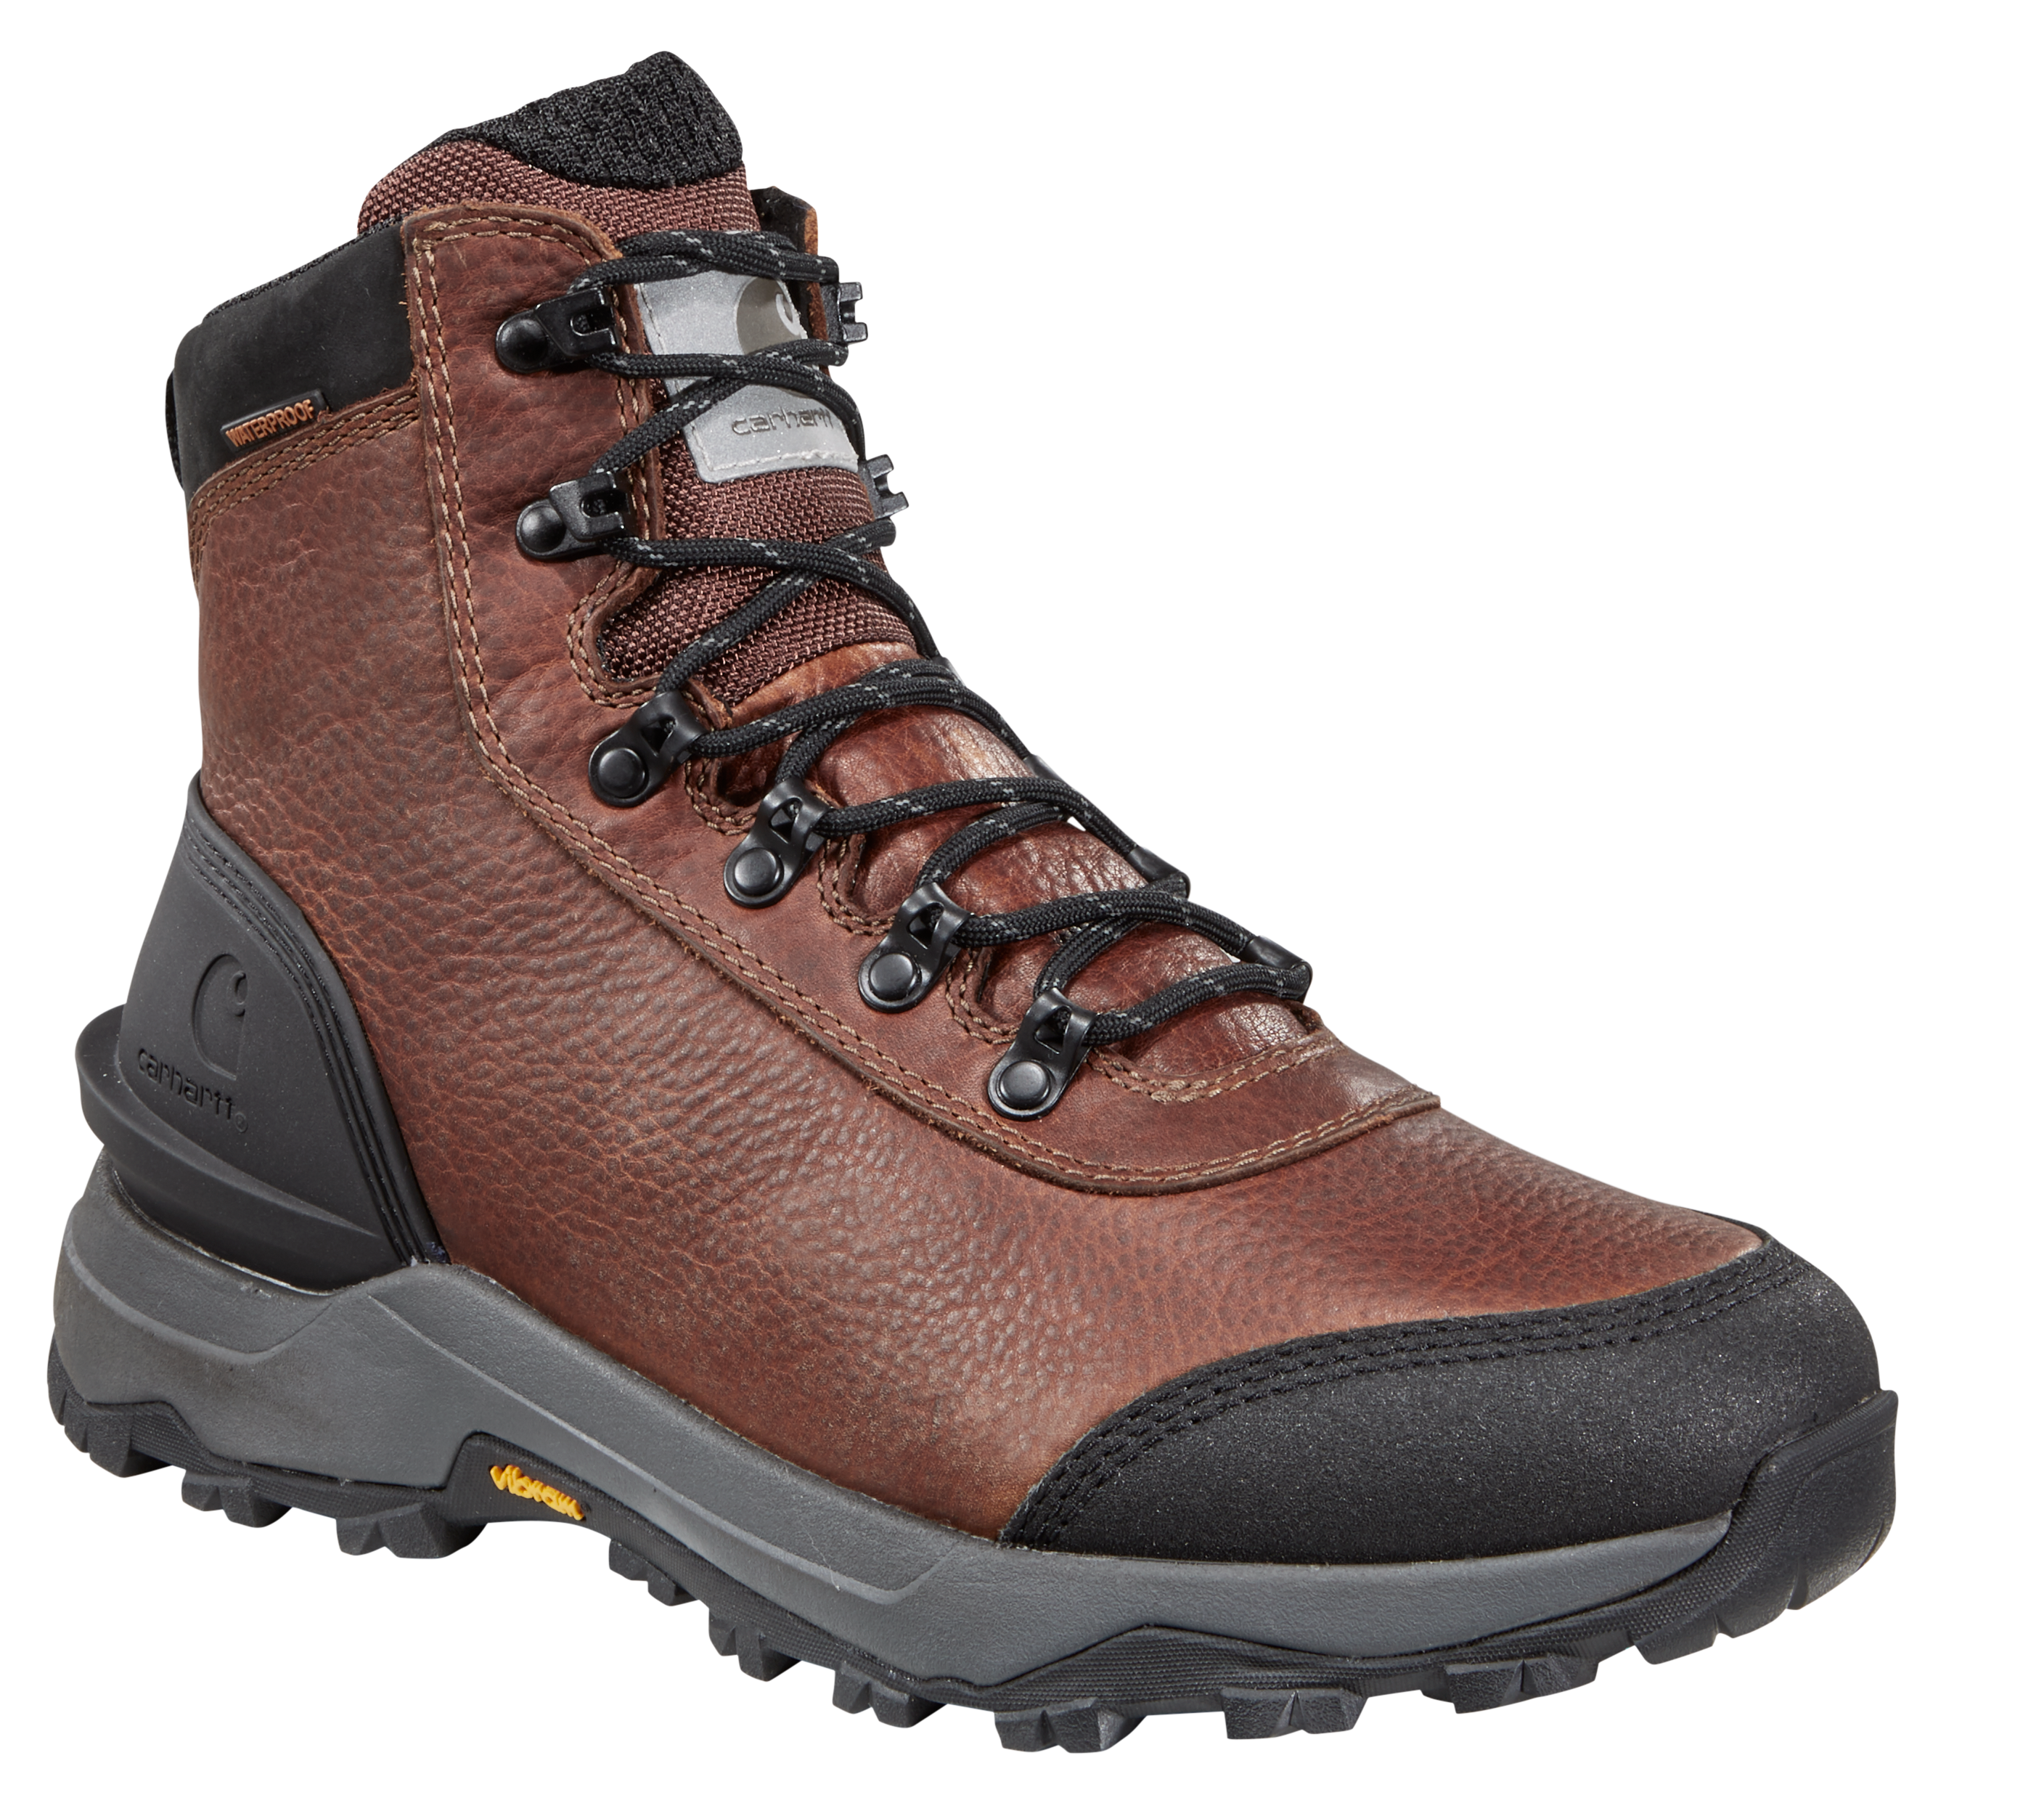 Carhartt Outdoor Hiker Insulated Waterproof Hiking Boots for Men - Mineral Red - 10.5M